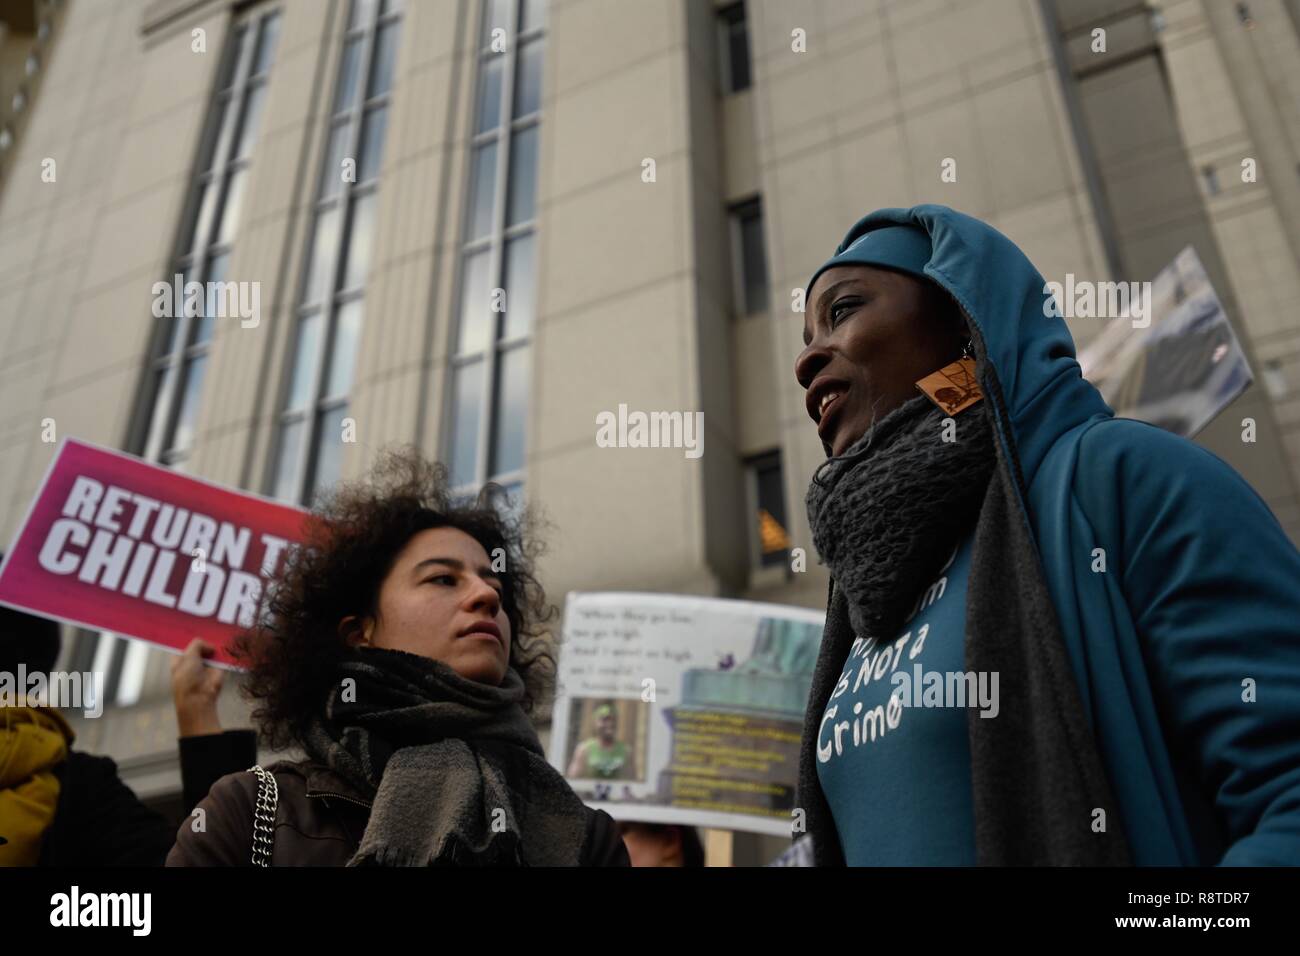 New York, U.S., 17 December 2017  Statue of Liberty climber Patricia Okoumou speaks with supporters outside federal court before her trial by a federal judge on misdemeanor charges of trespassing, disorderly conduct, and interfering with the functioning of government for her act of civil disobedience on July 4. Okoumou climbed the base of the statue to protest against Trump administration immigration policies. Credit: Joseph Reid/Alamy Live News Stock Photo